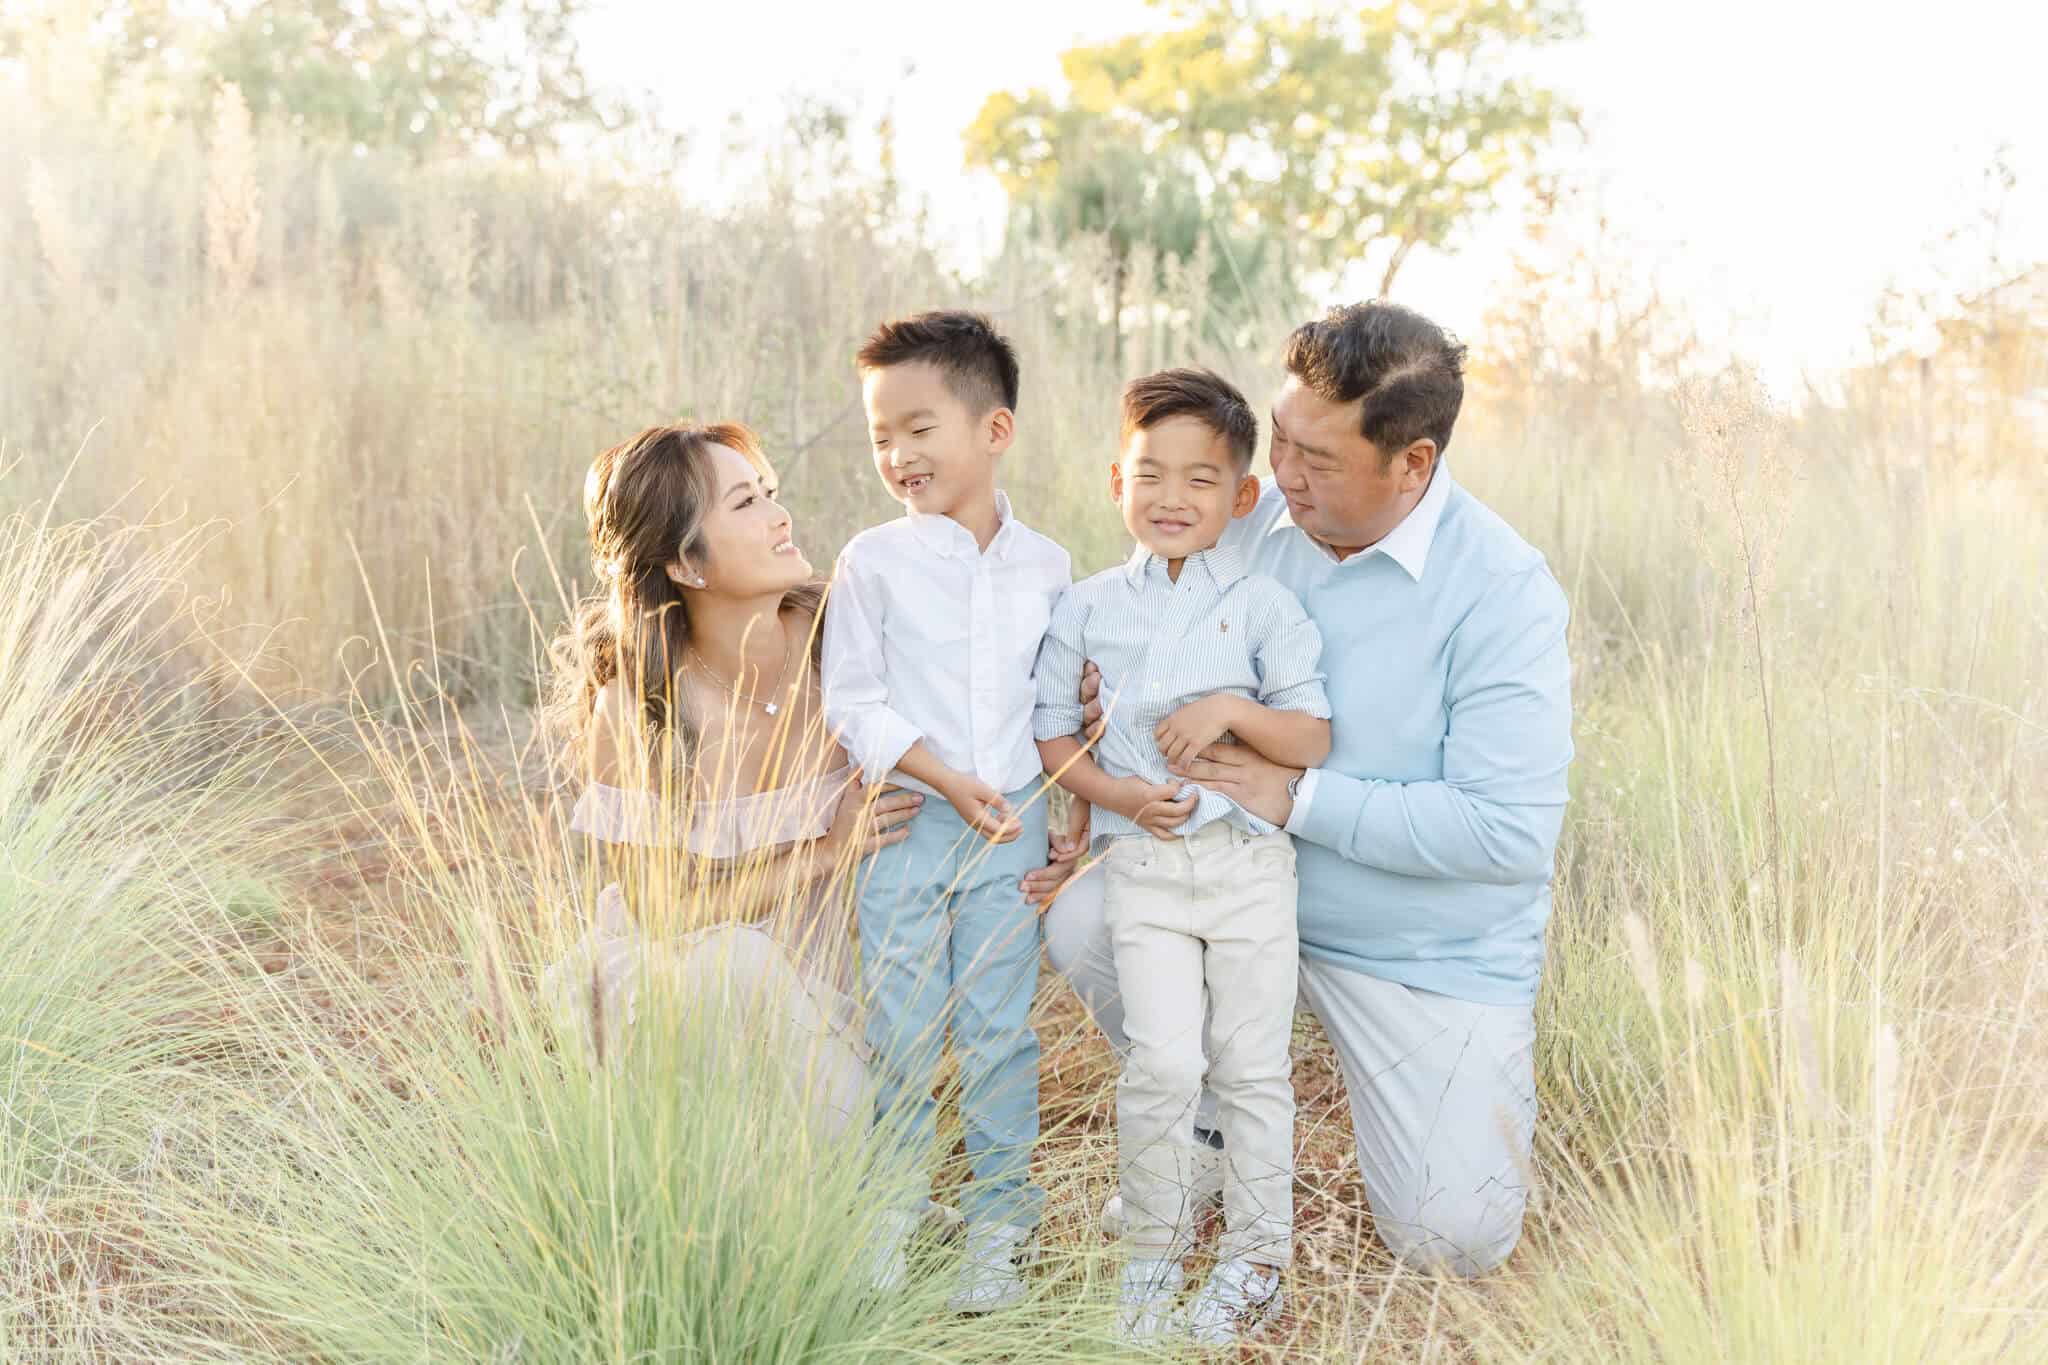 Asian family hugging in a field of tall grass with two boys right in the middle.